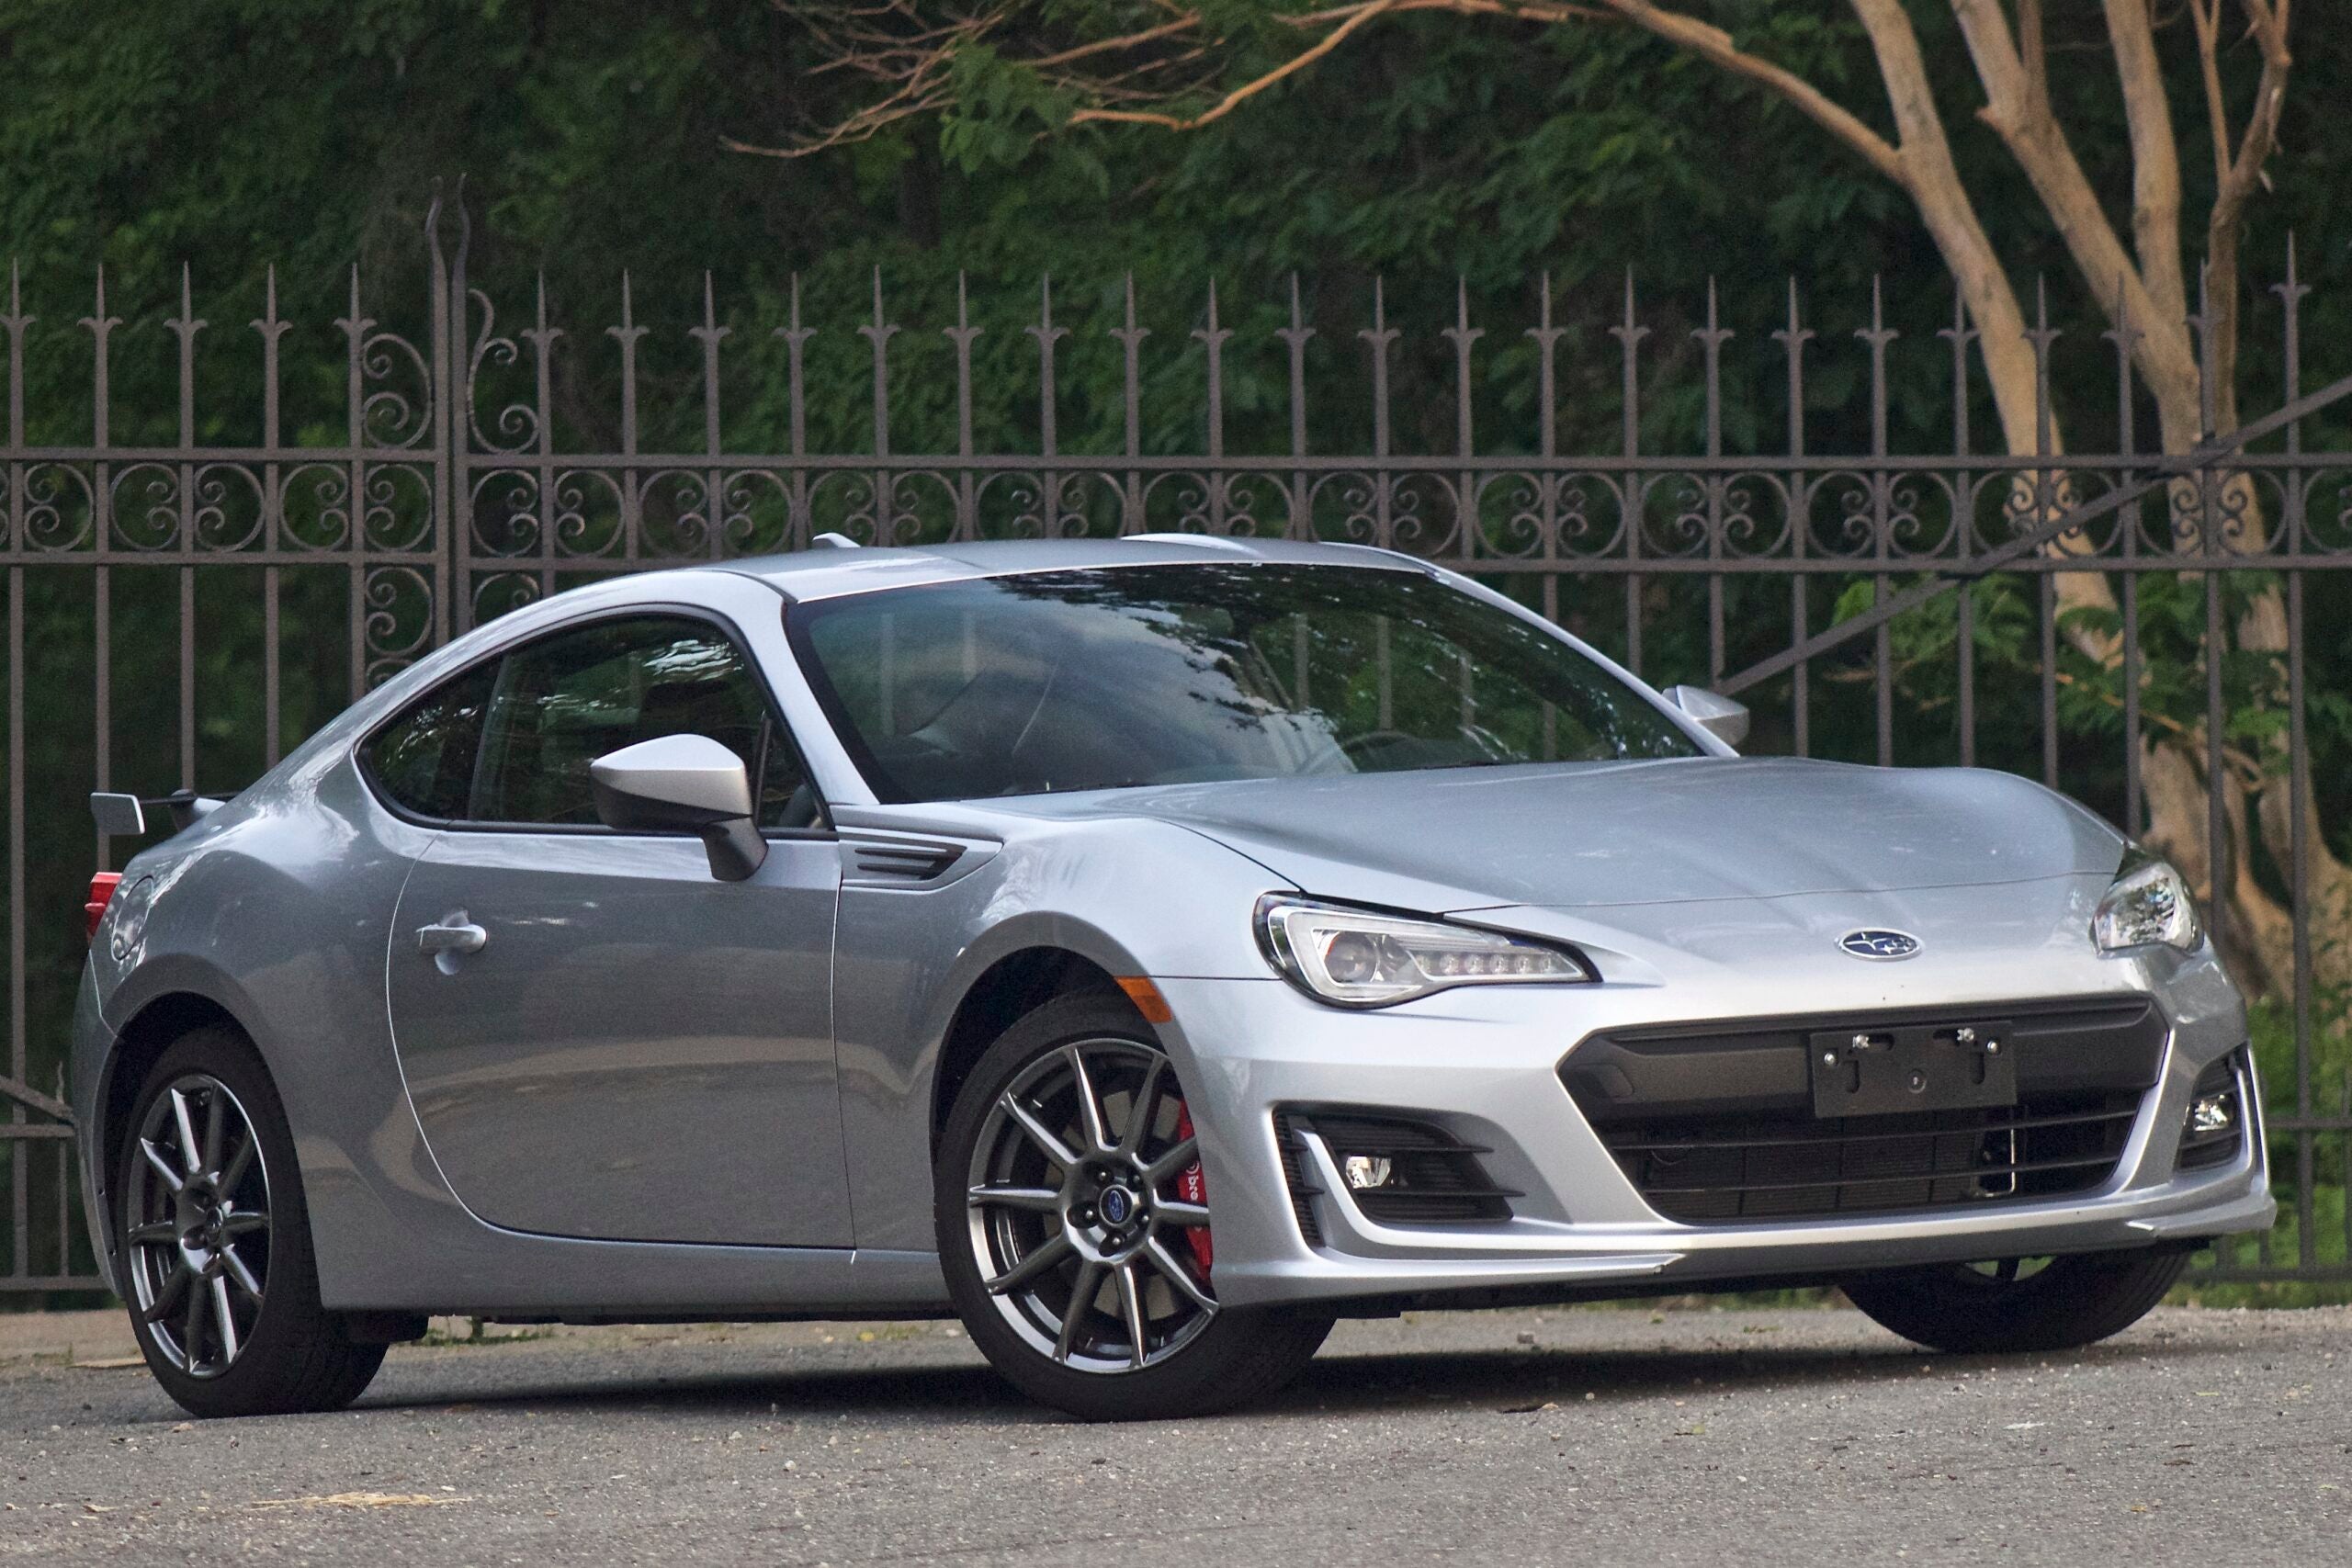 The 2017 Subaru BRZ embodies the affordable performance ideal